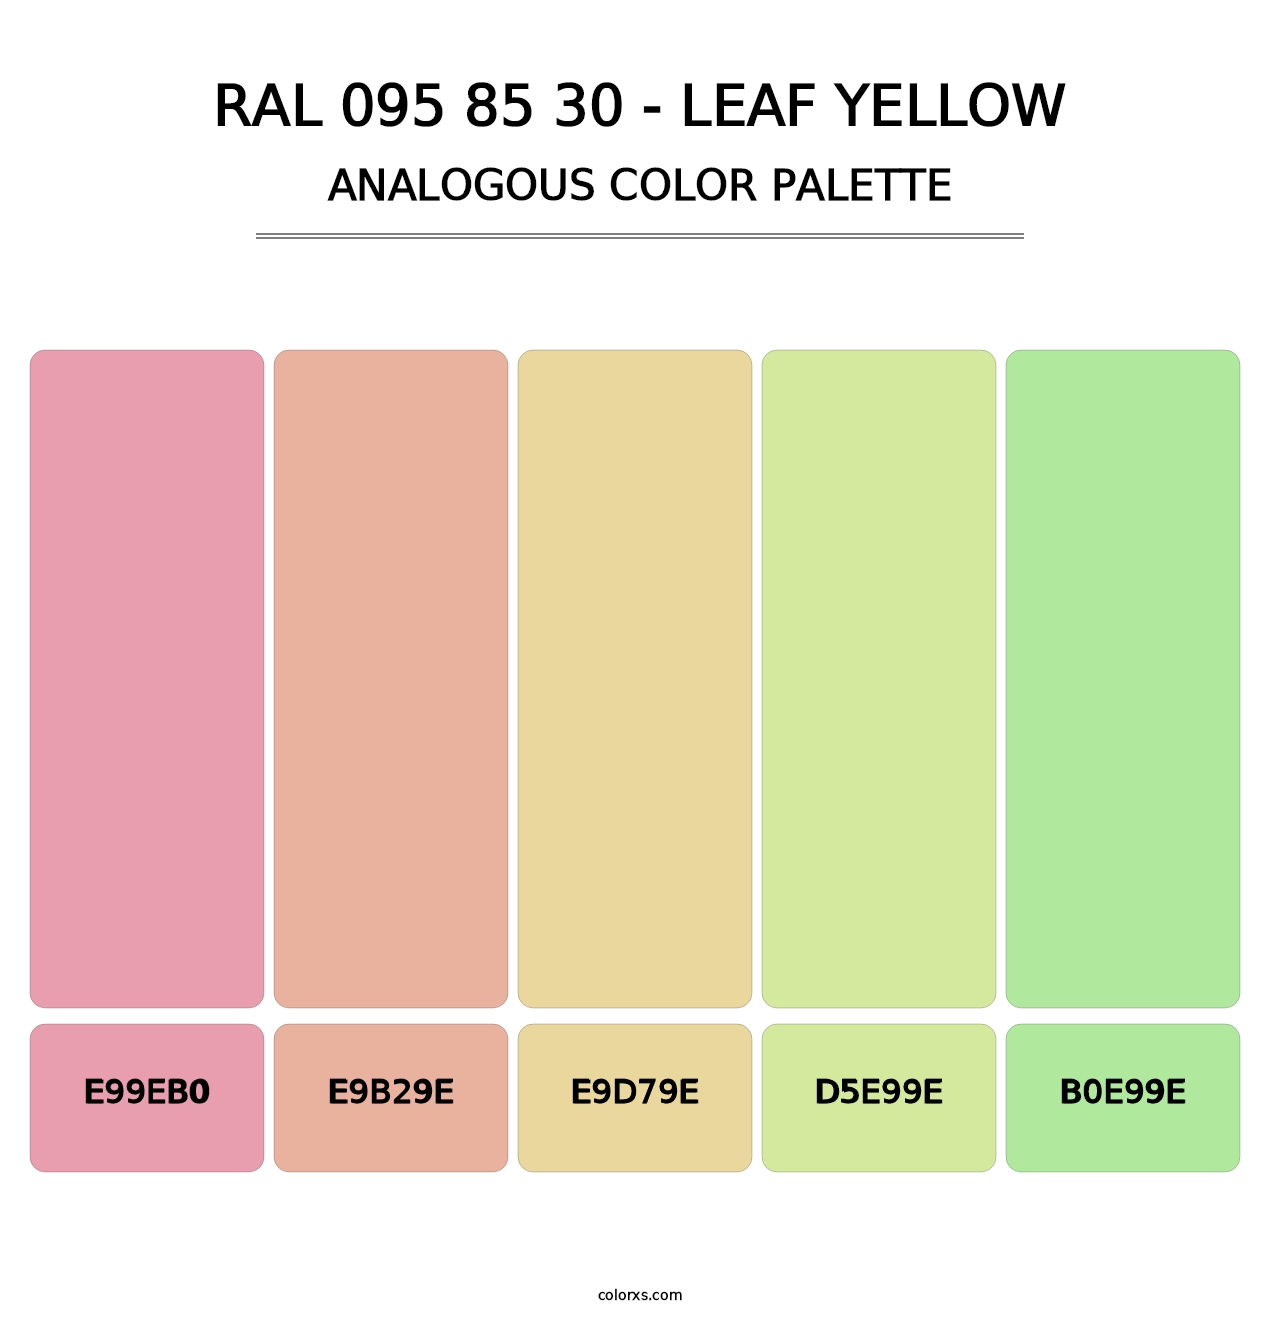 RAL 095 85 30 - Leaf Yellow - Analogous Color Palette